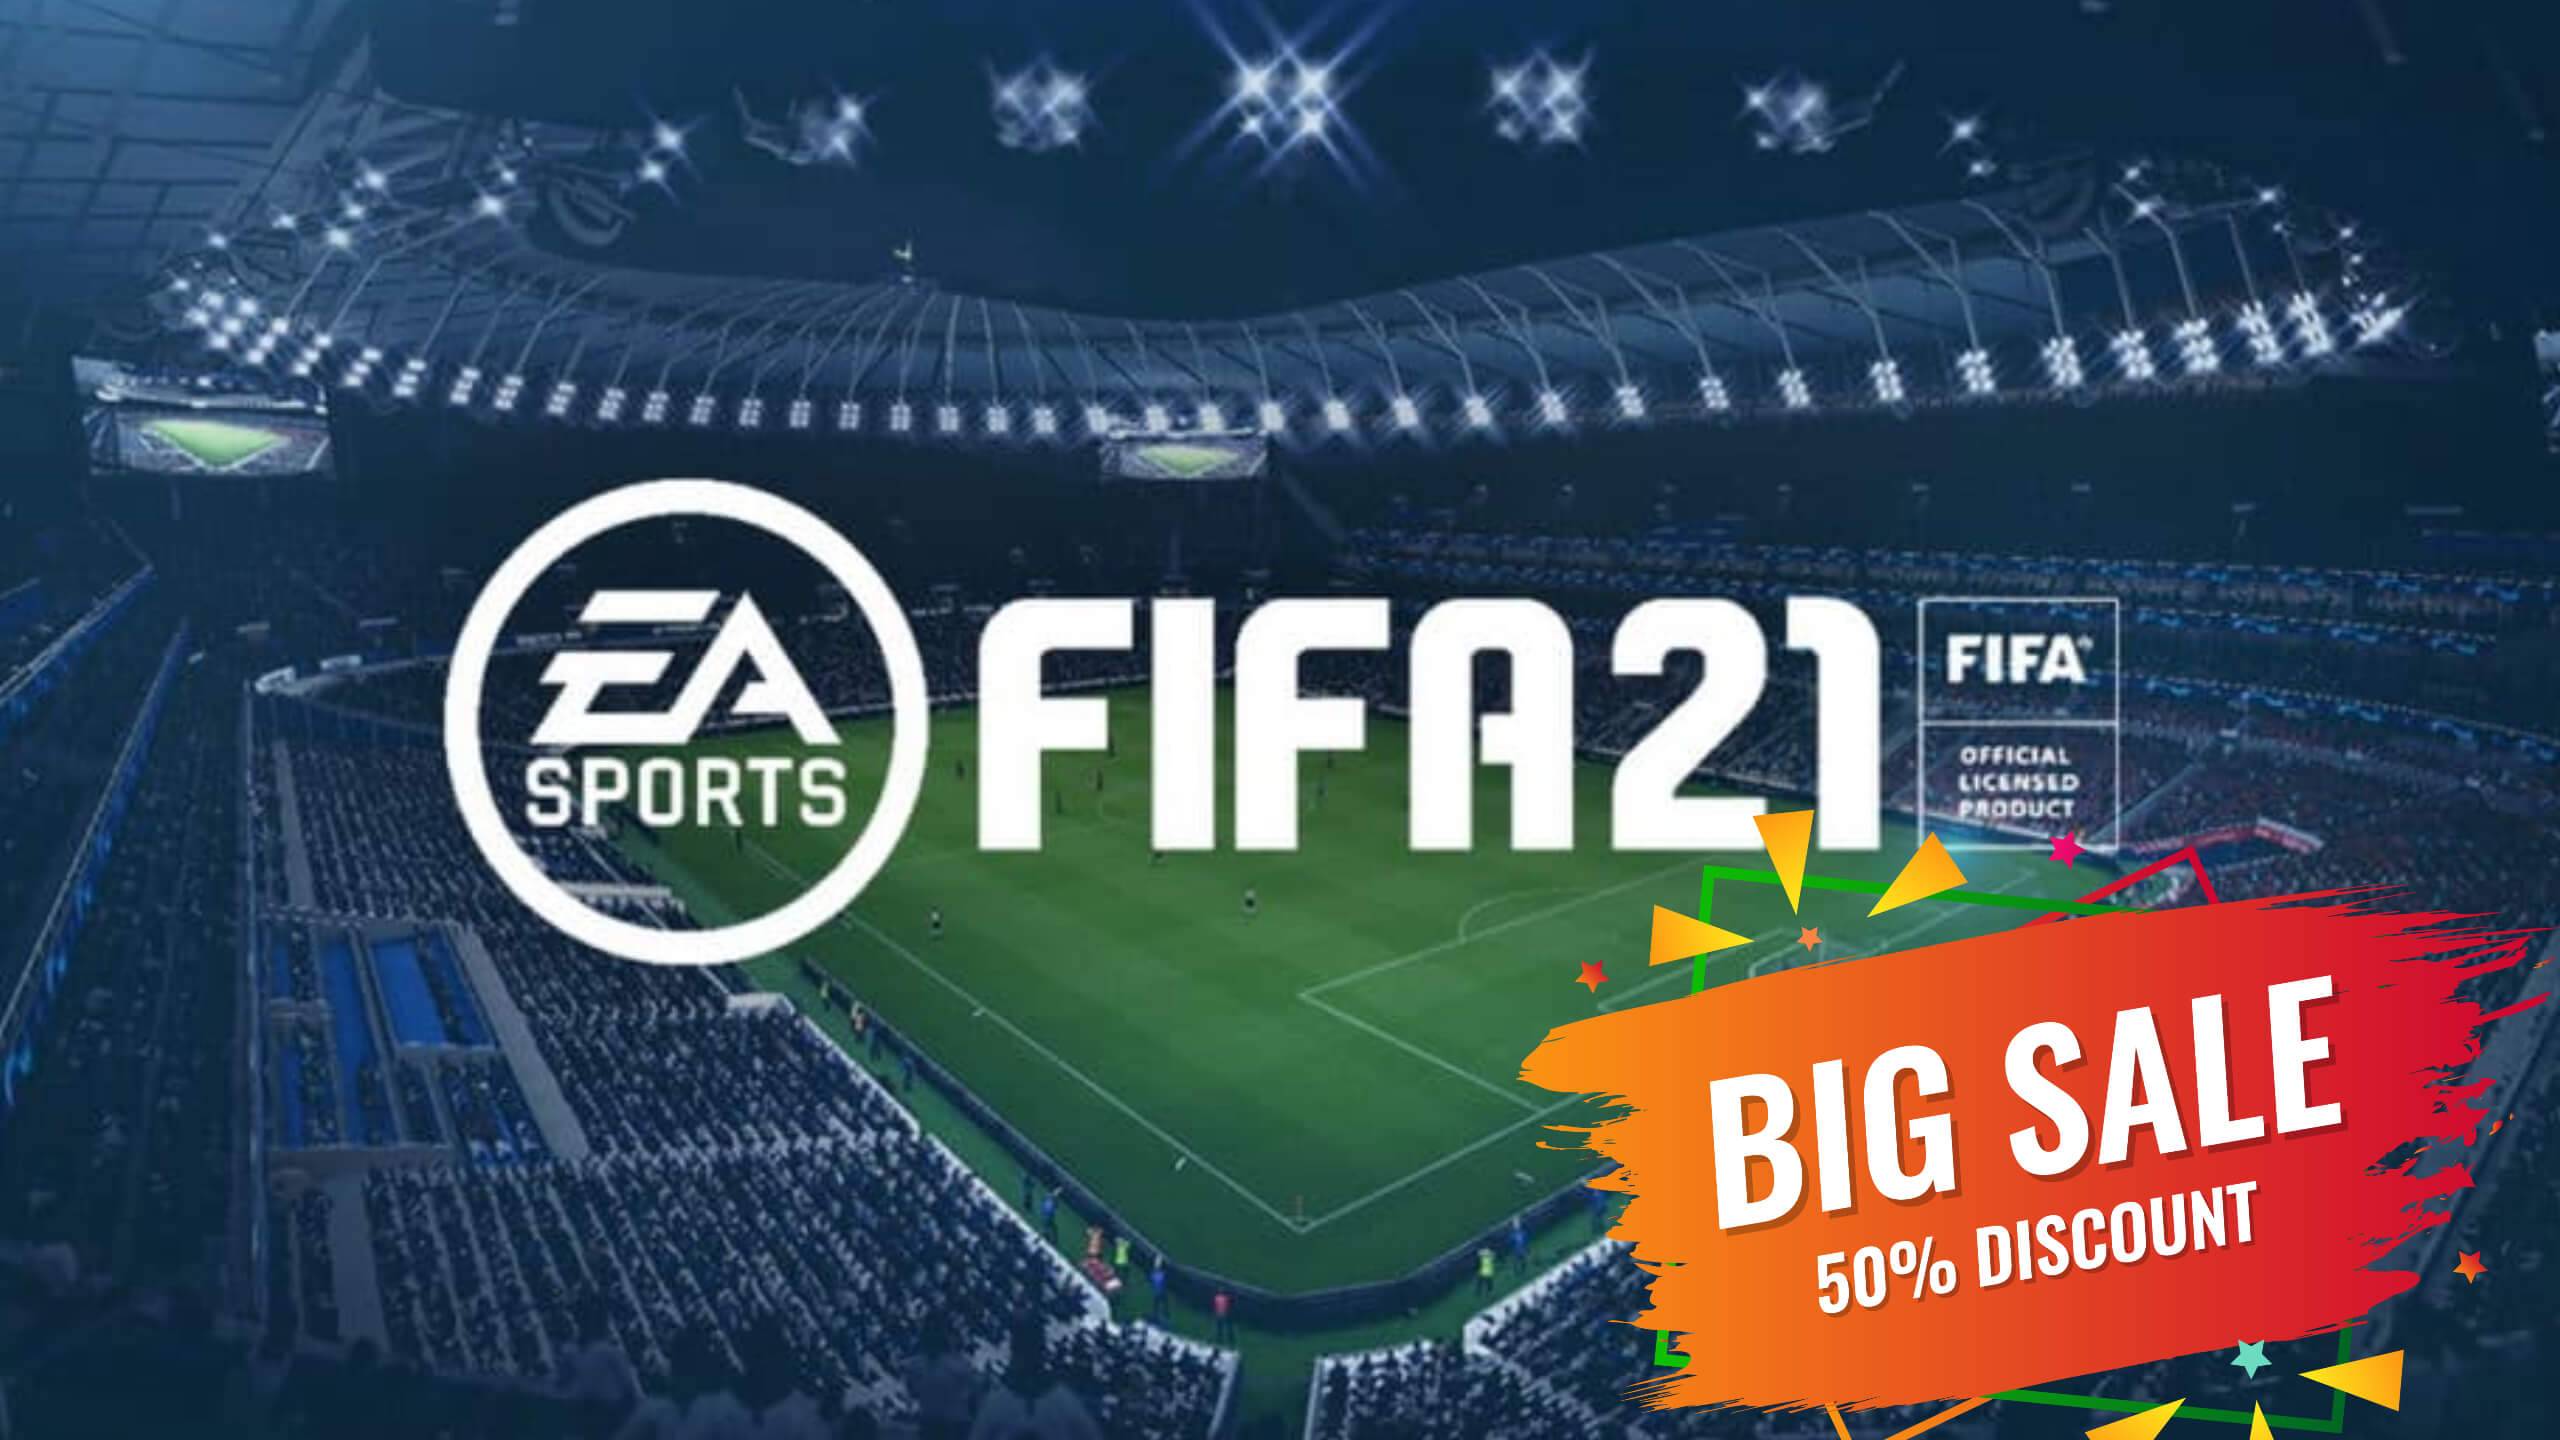 FIFA 21 Buy Cheap - Xbox One/PS4/PC - Flat 30% Off - $35